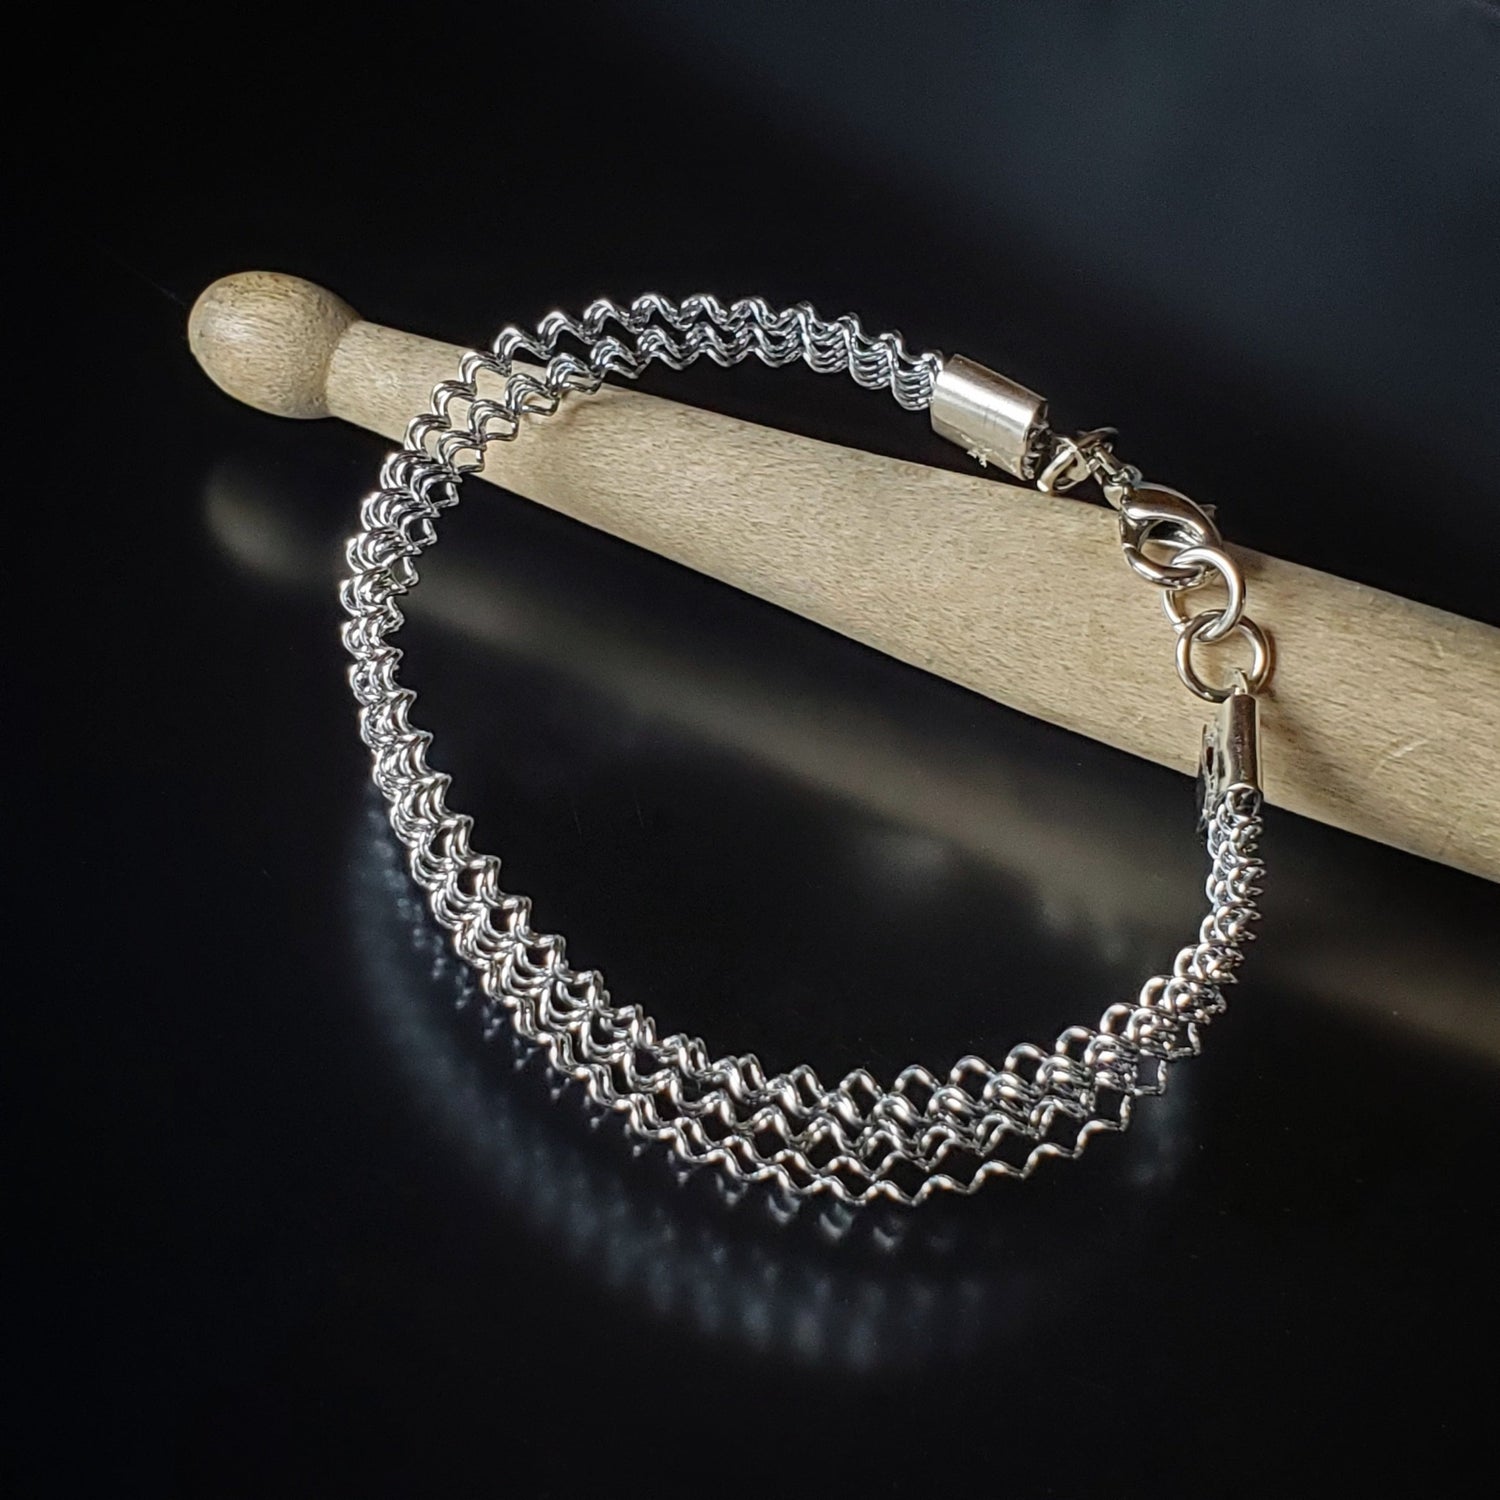 silver coloured clasp style bracelet made from a series of upcycled snare drum strings - bracelet is lying across a drumstick